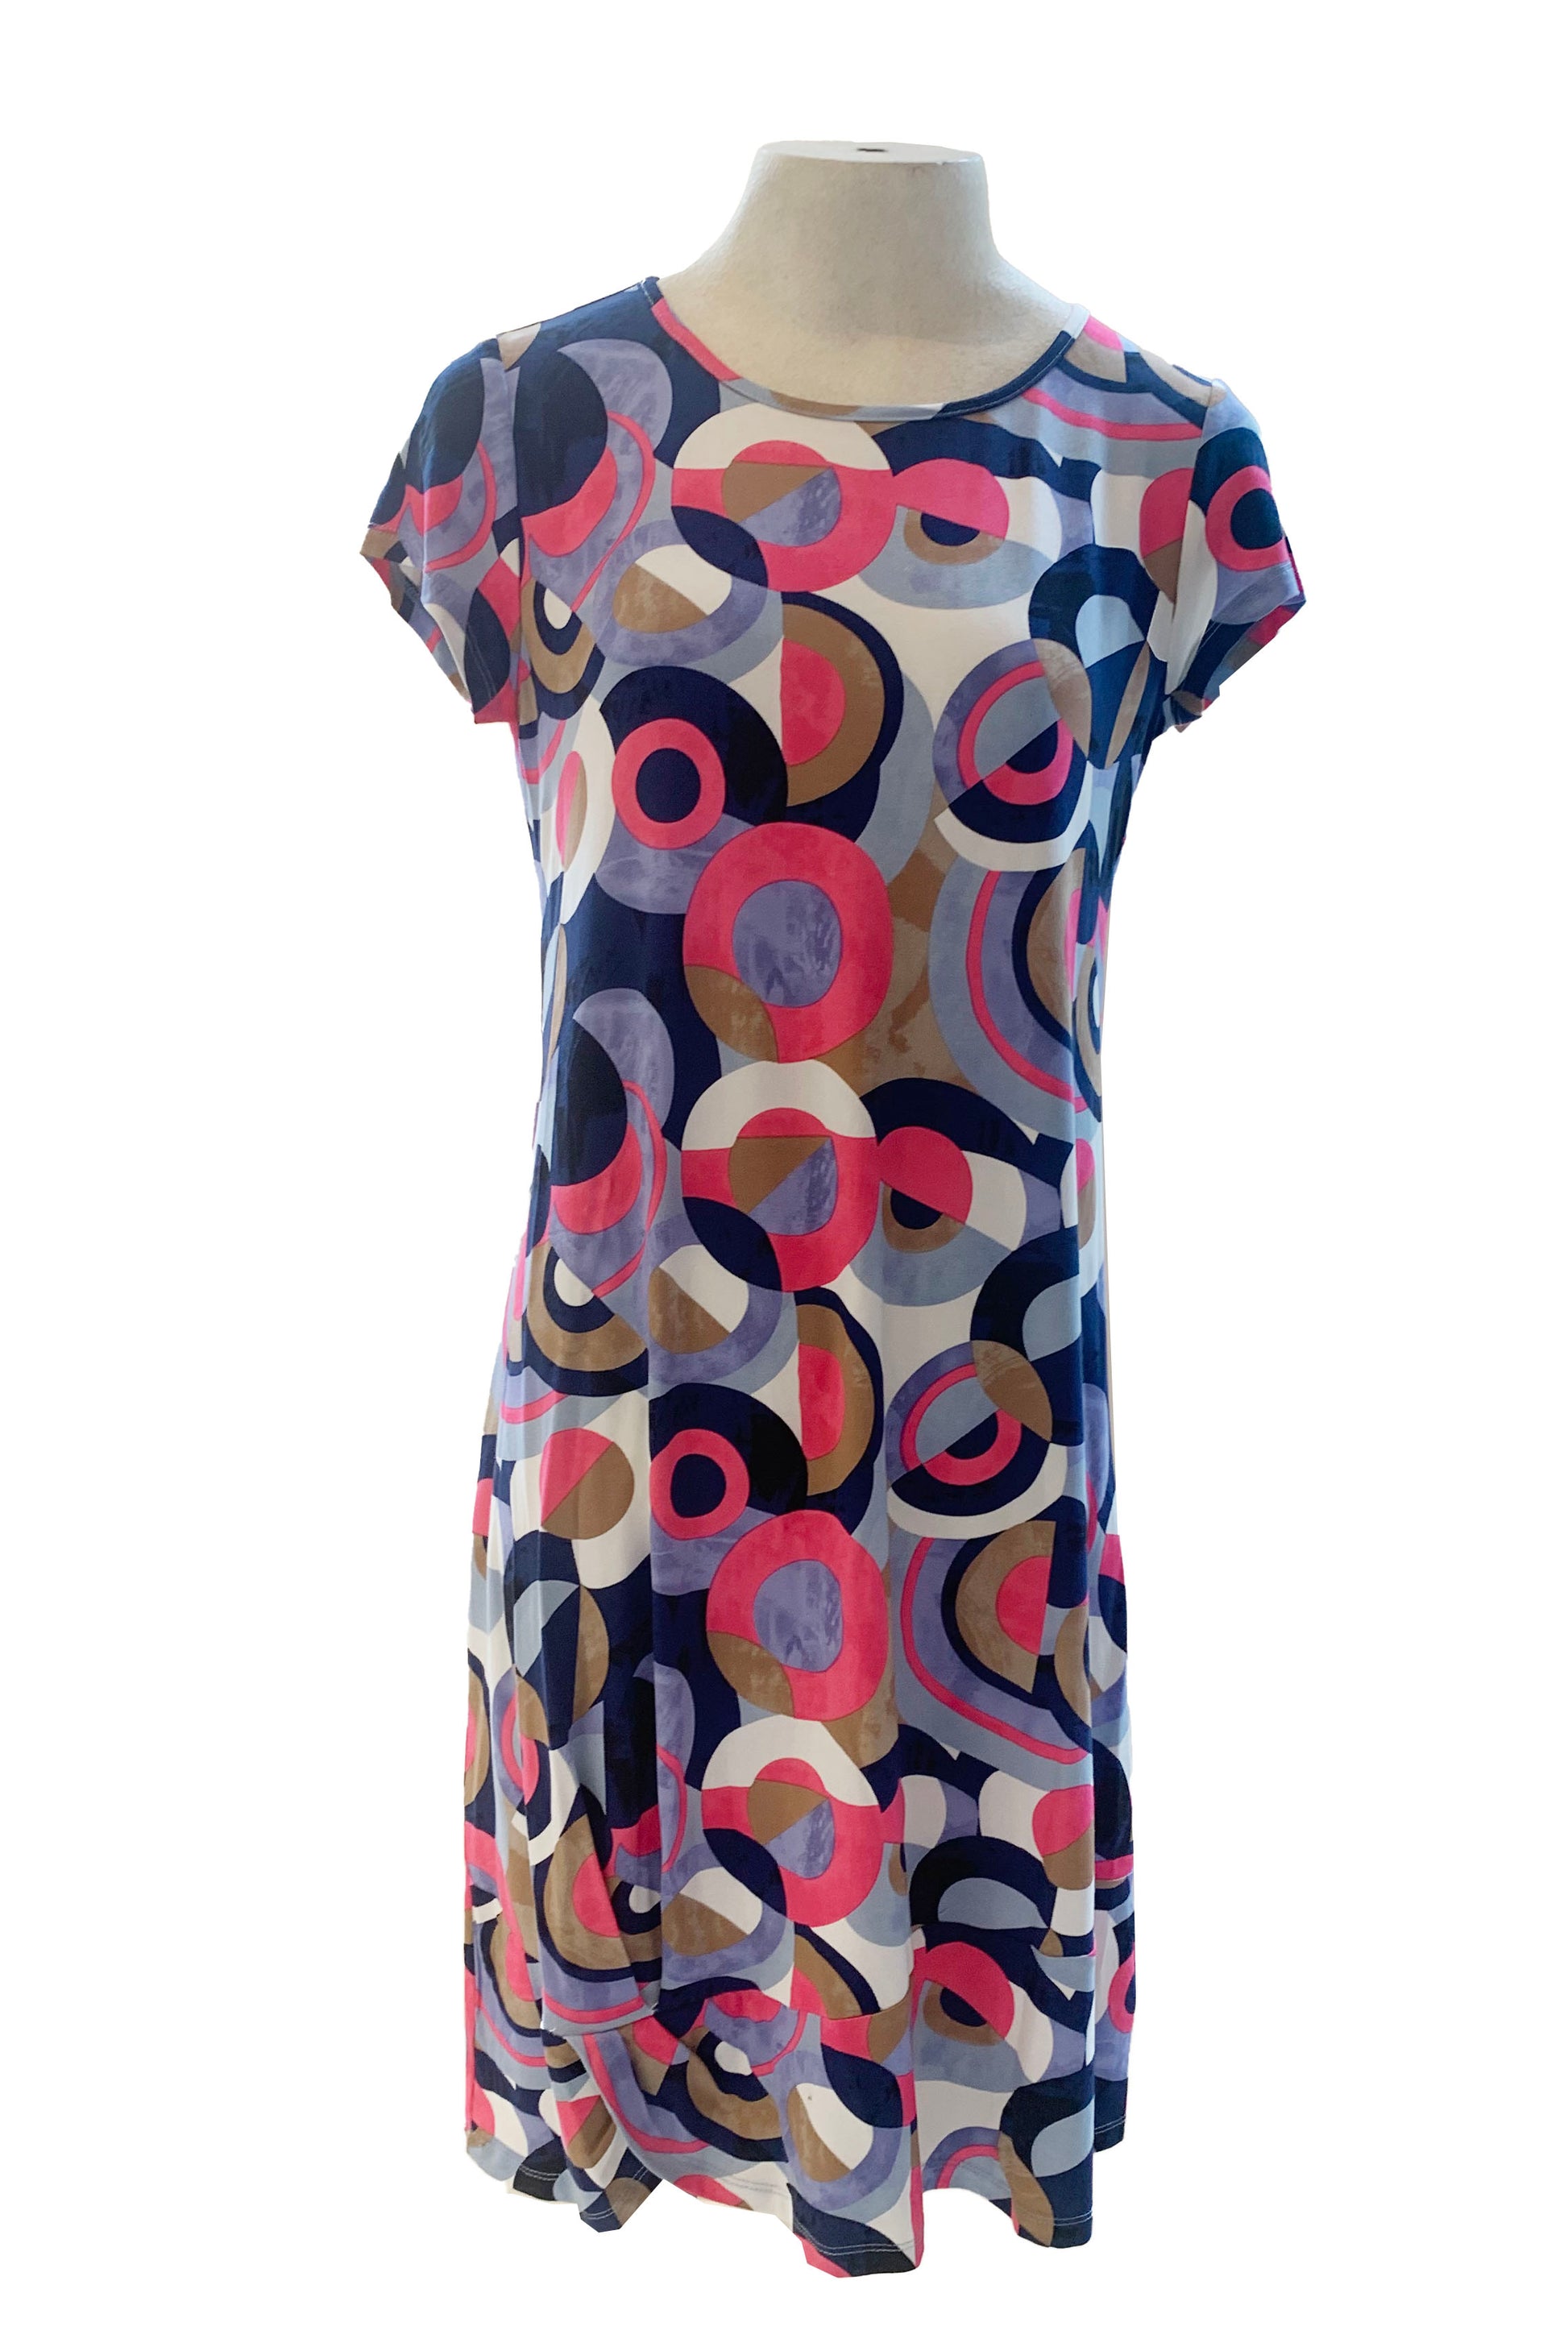 The Chantal Dress by Pure Essence in a Pink/Navy circles pattern is show on a mannequin in front of a white background 